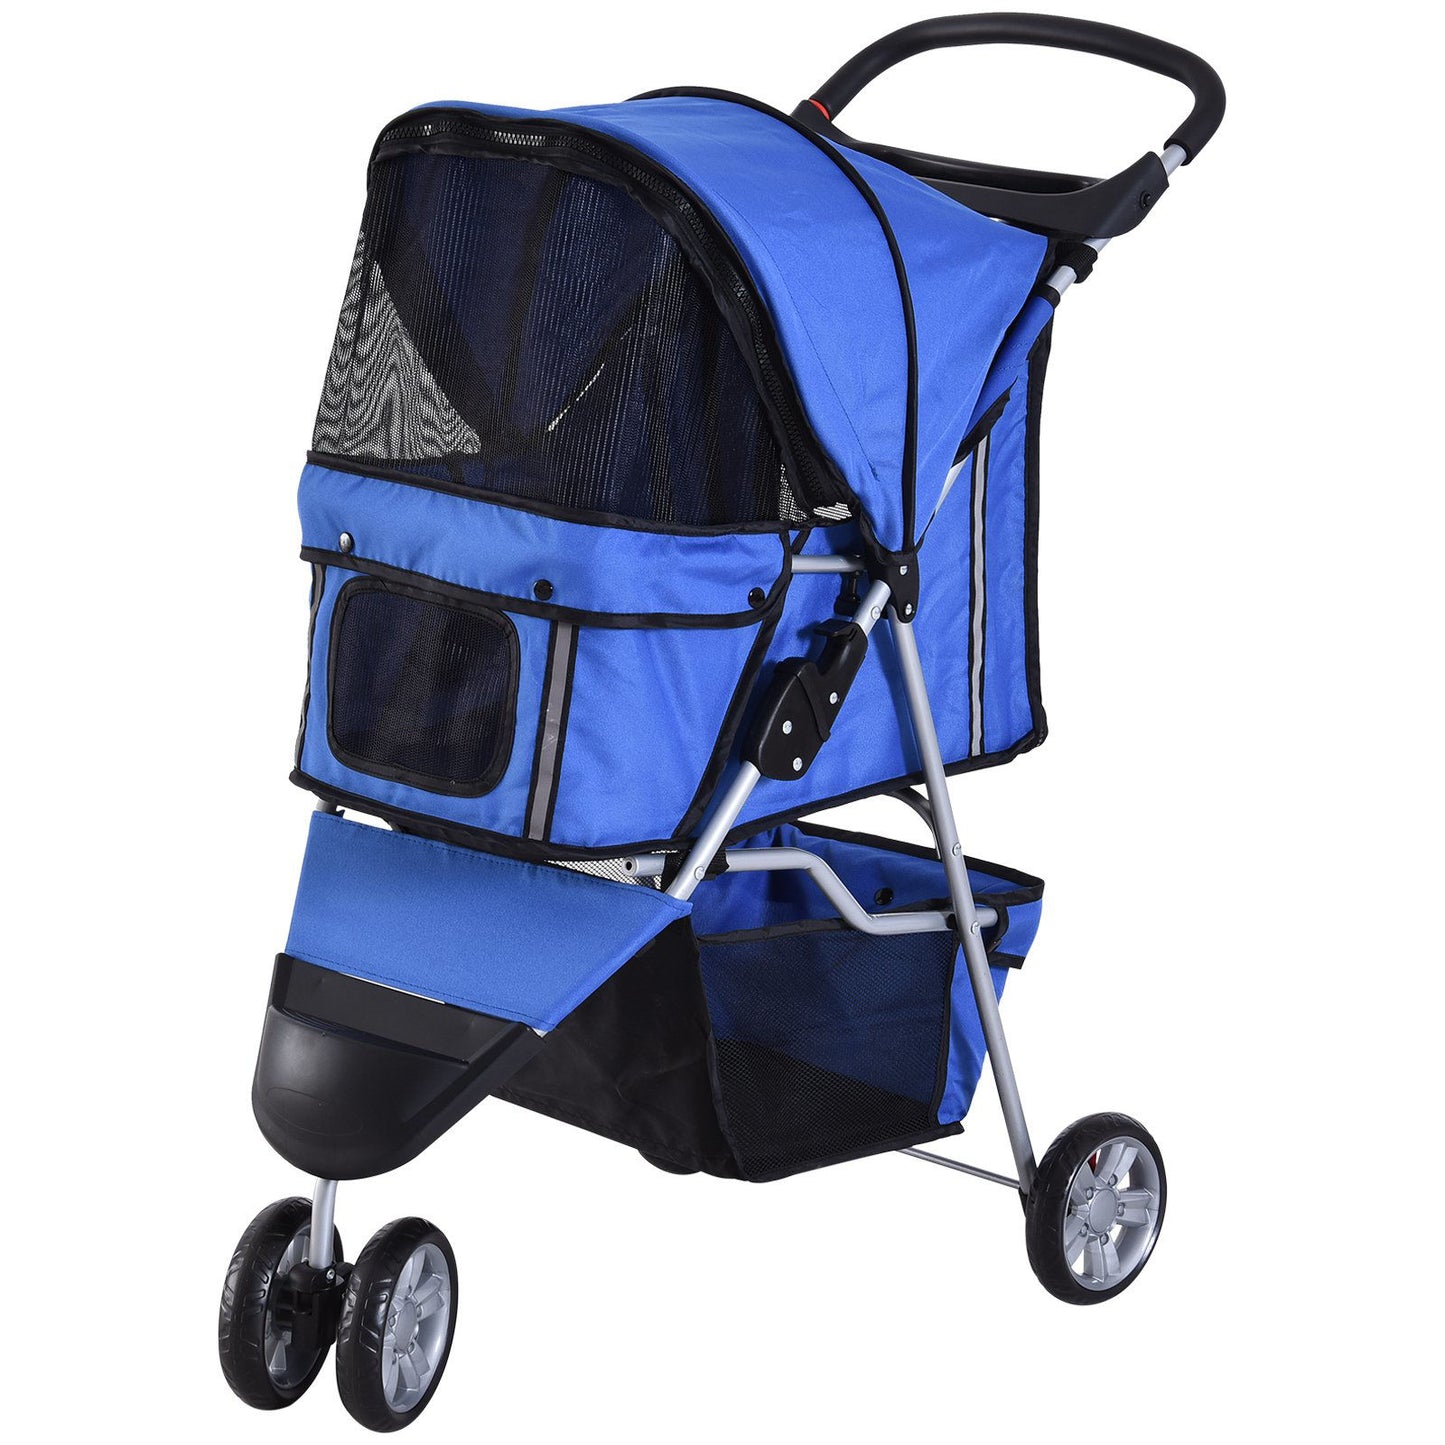 Nancy's The Chair Dog buggy chiens chats multicolore (bleu)